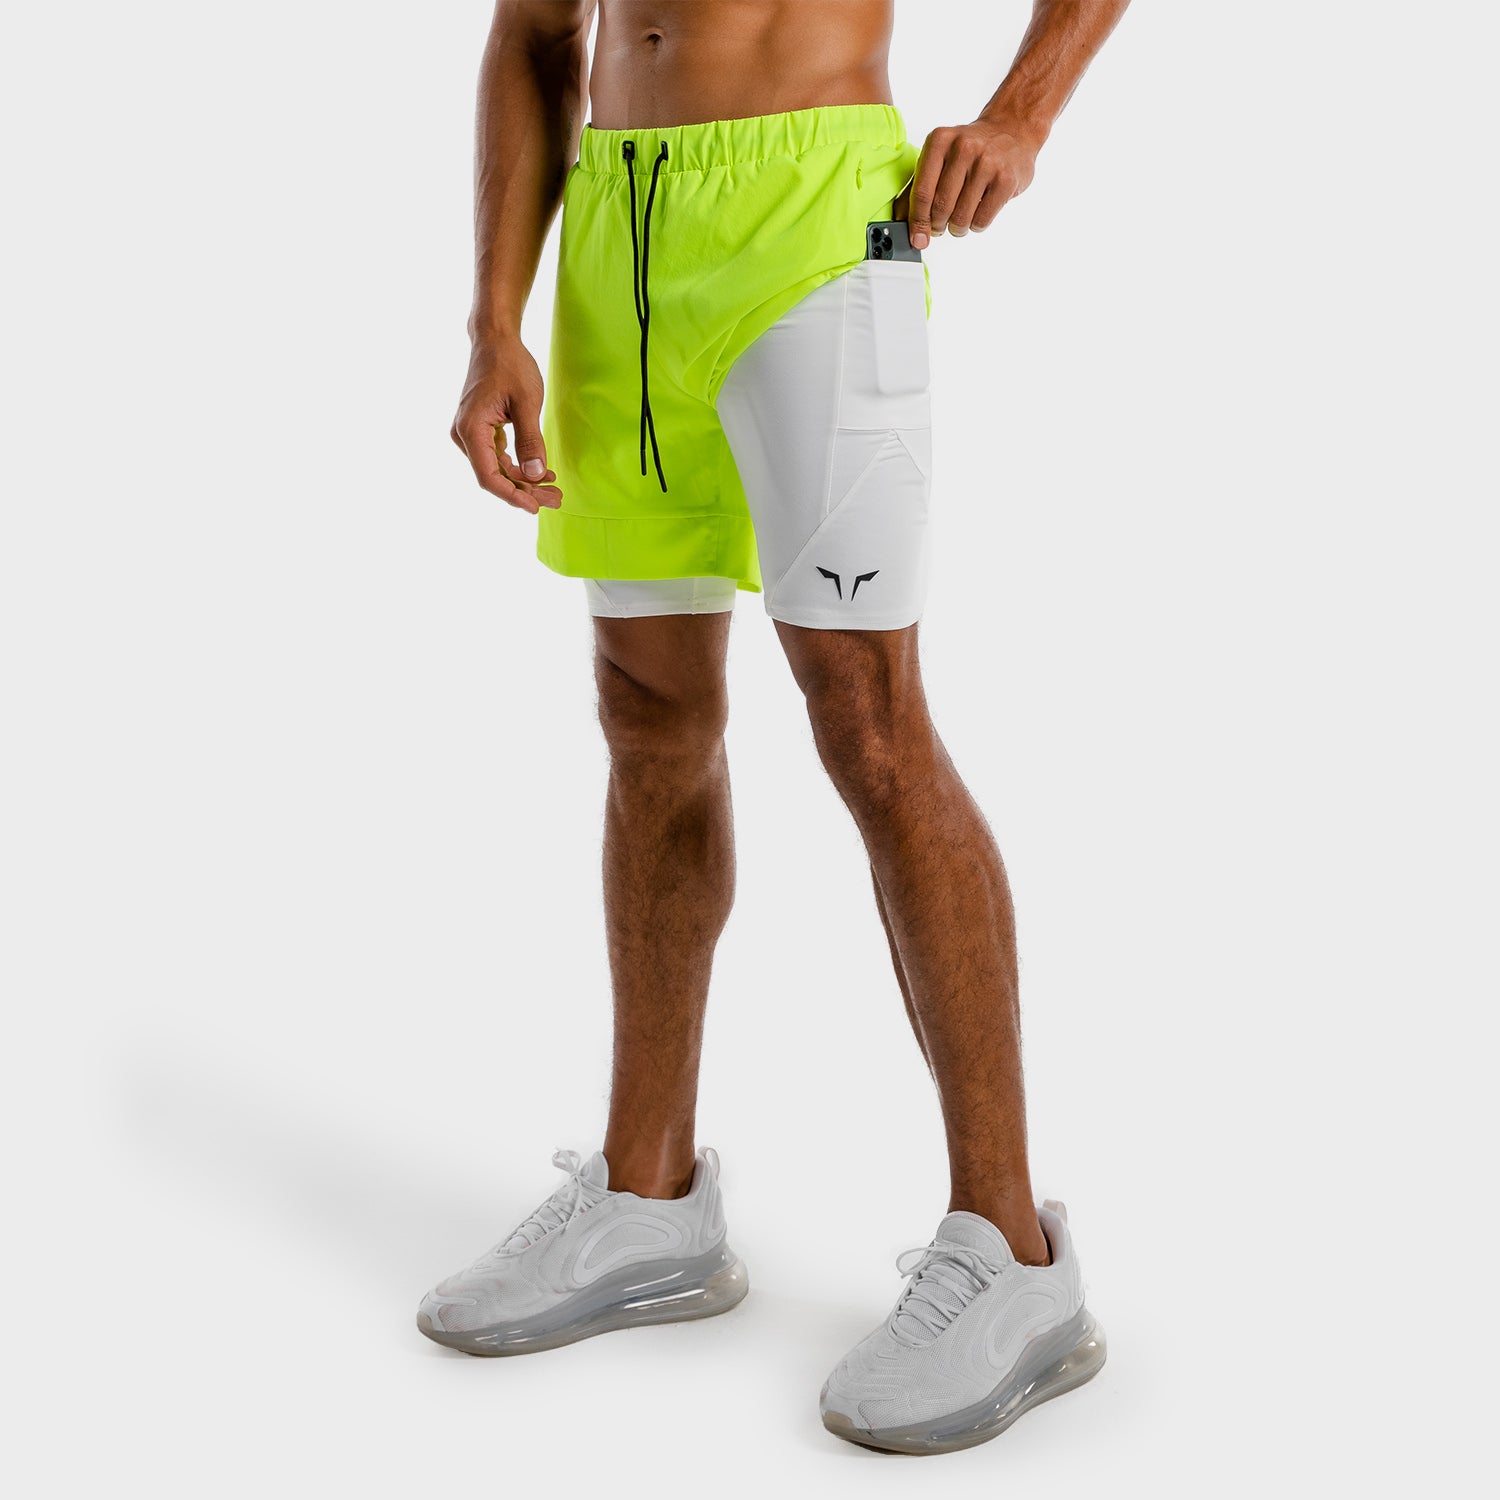 Limitless 2-in-1 Shorts - Neon And White | Gym Shorts Men | SQUATWOLF